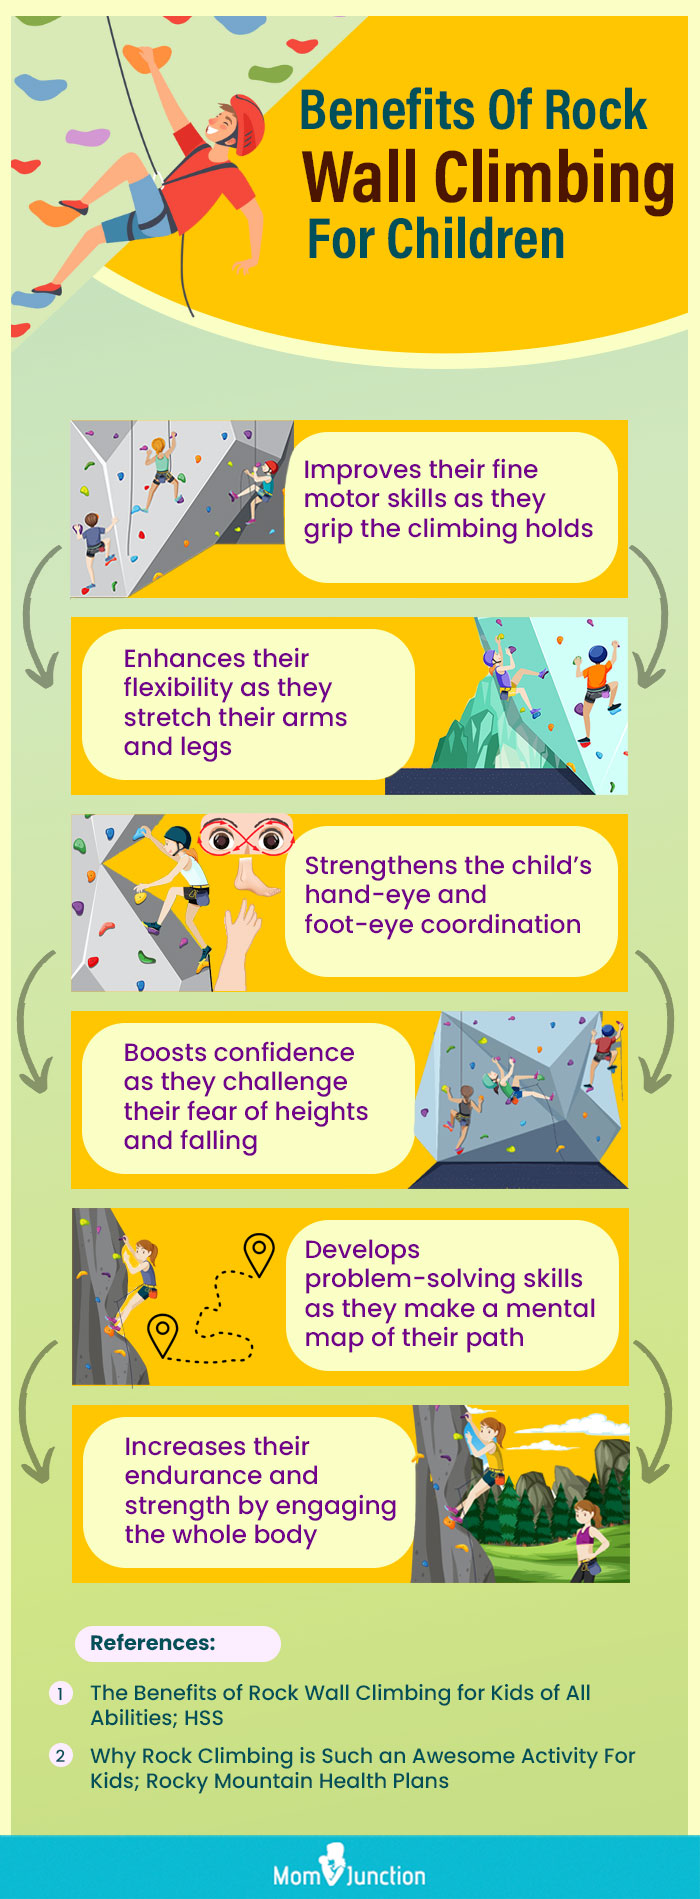 Benefits Of Rock Wall Climbing For Children (infographic)